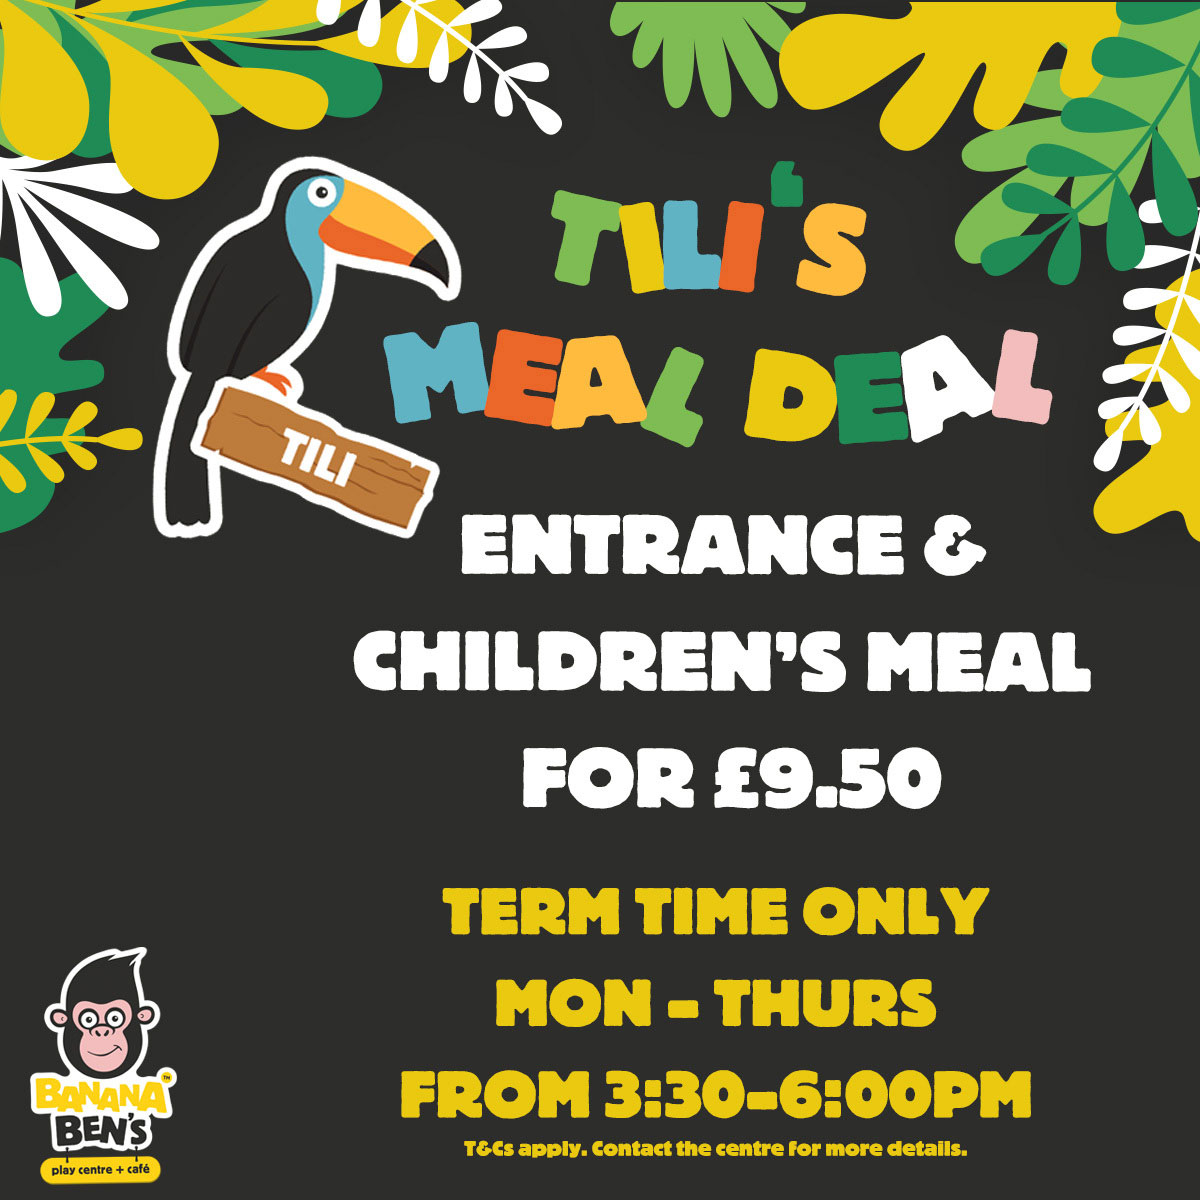 Meal deal is available for £8.00 on Mon - Thurs 15:30 to 18:00 during term time